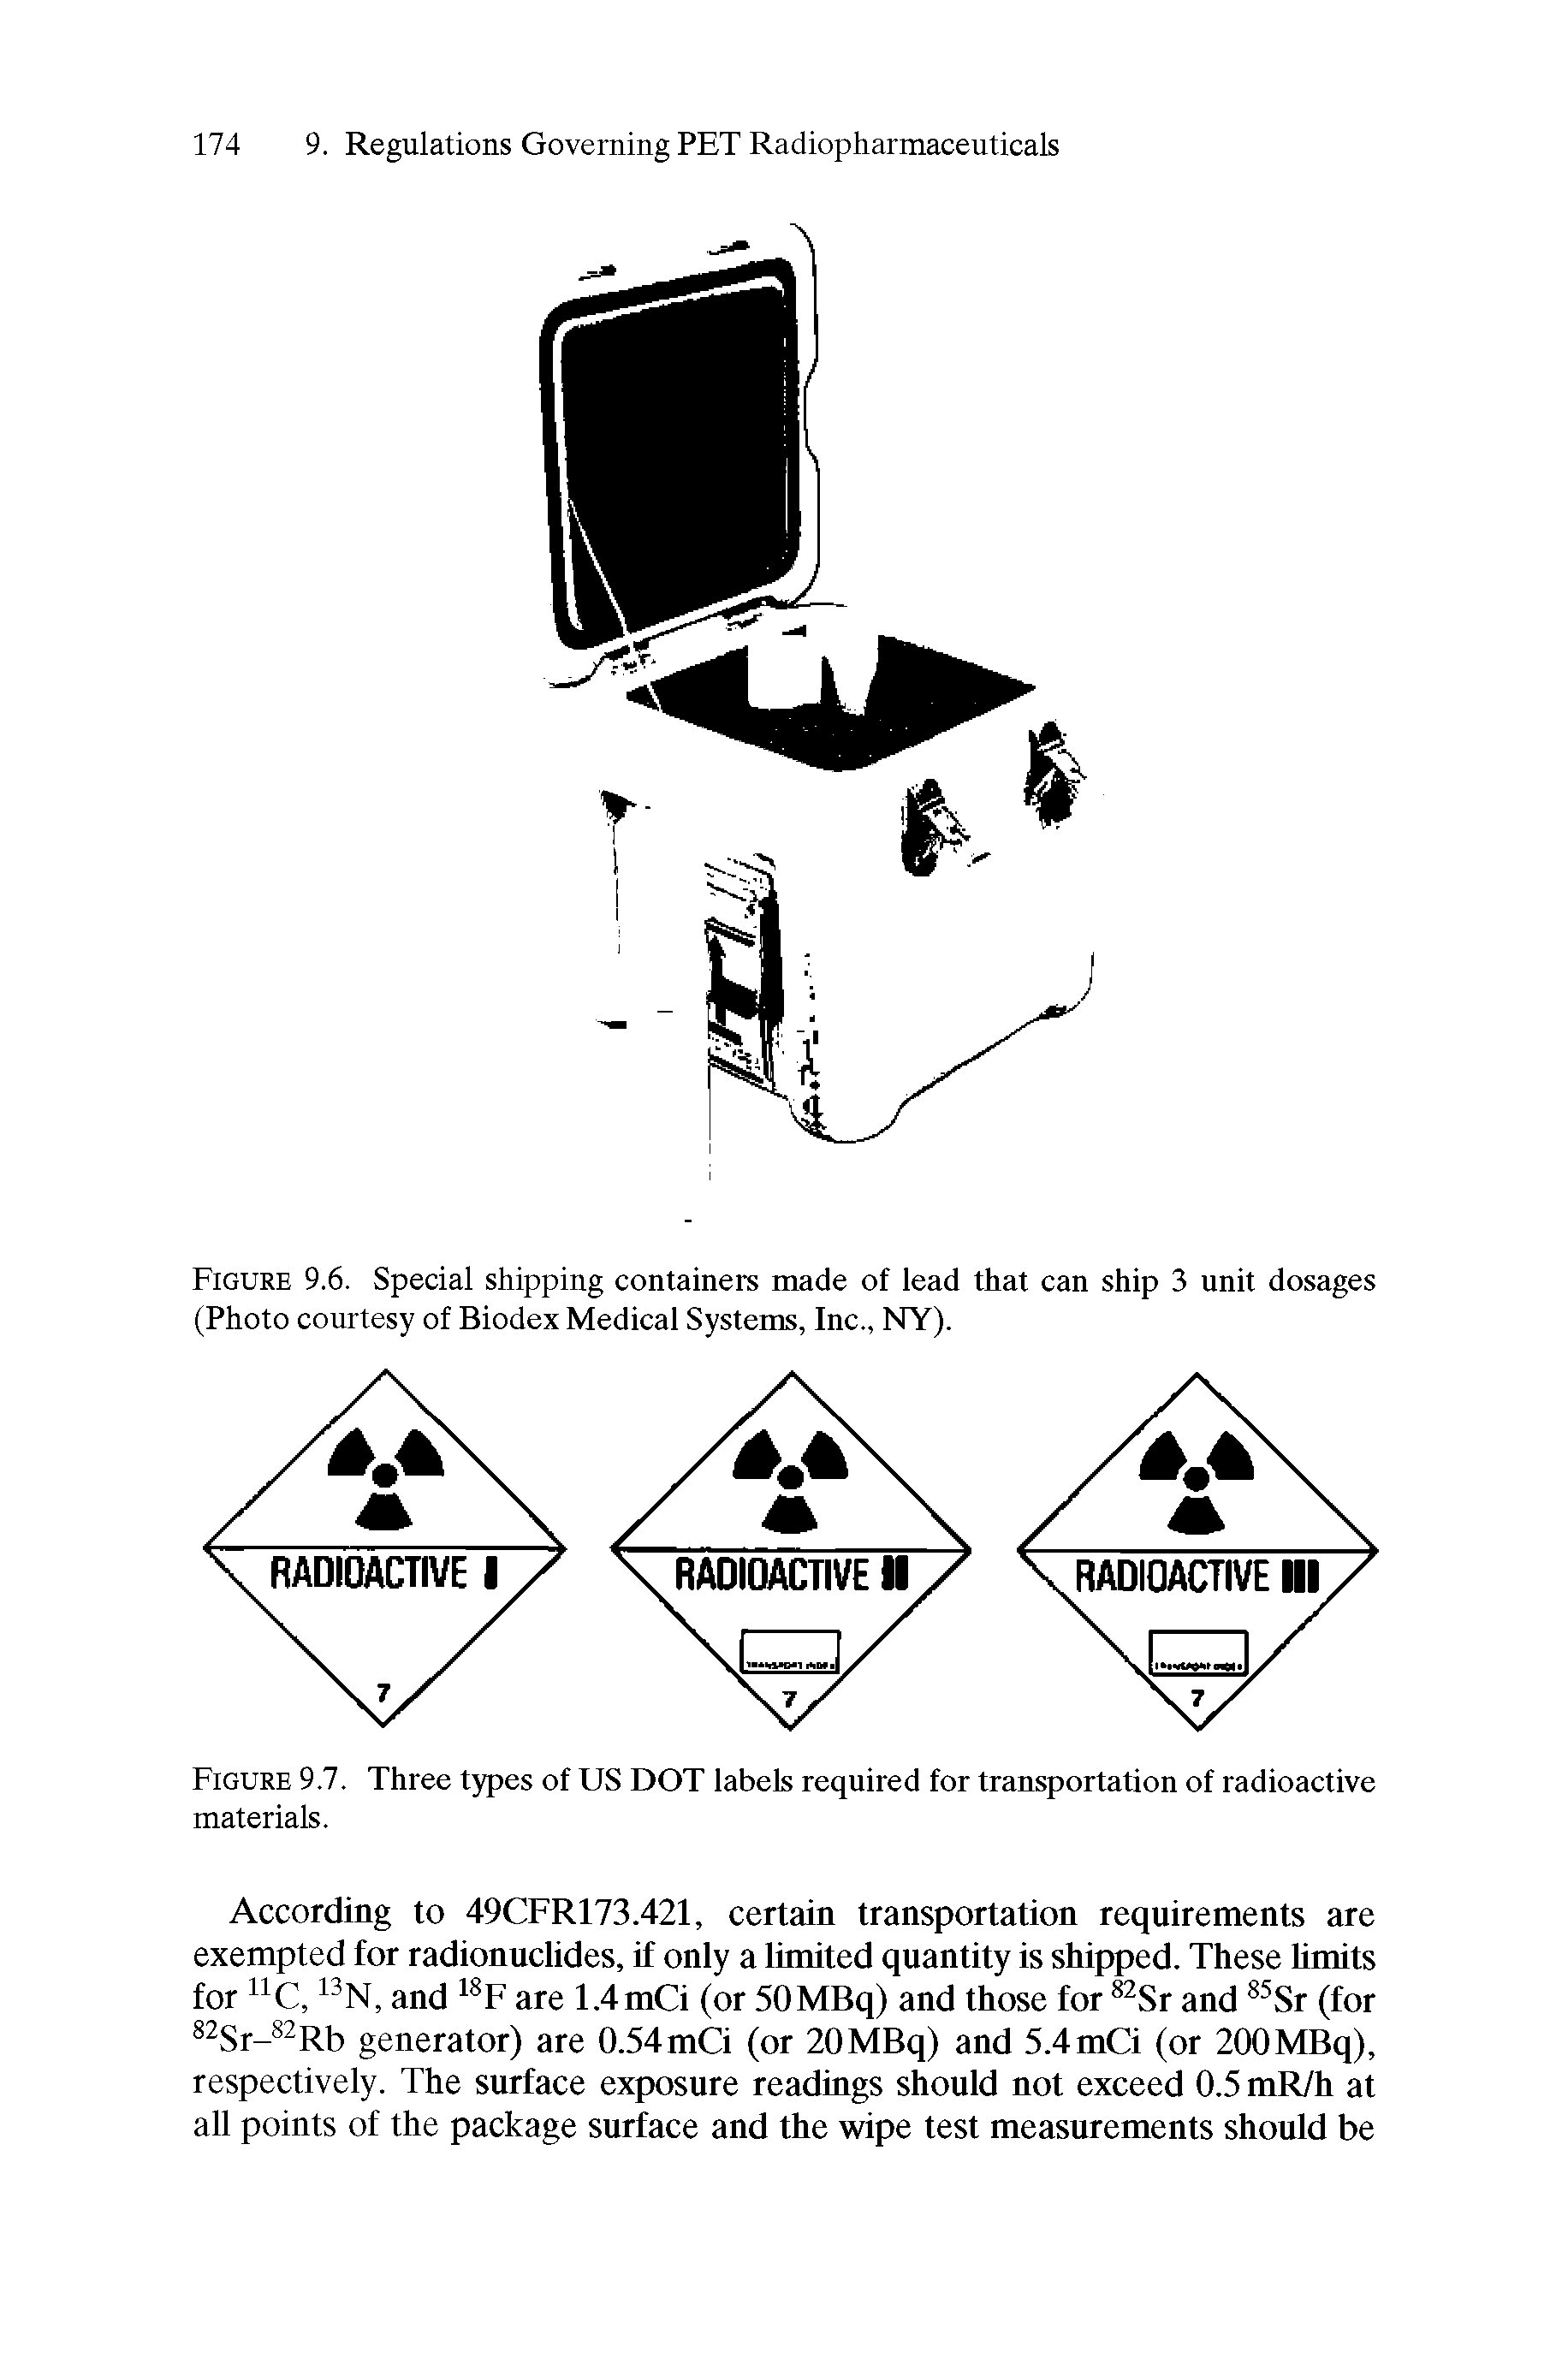 Figure 9.7. Three types of US DOT labels required for transportation of radioactive materials.